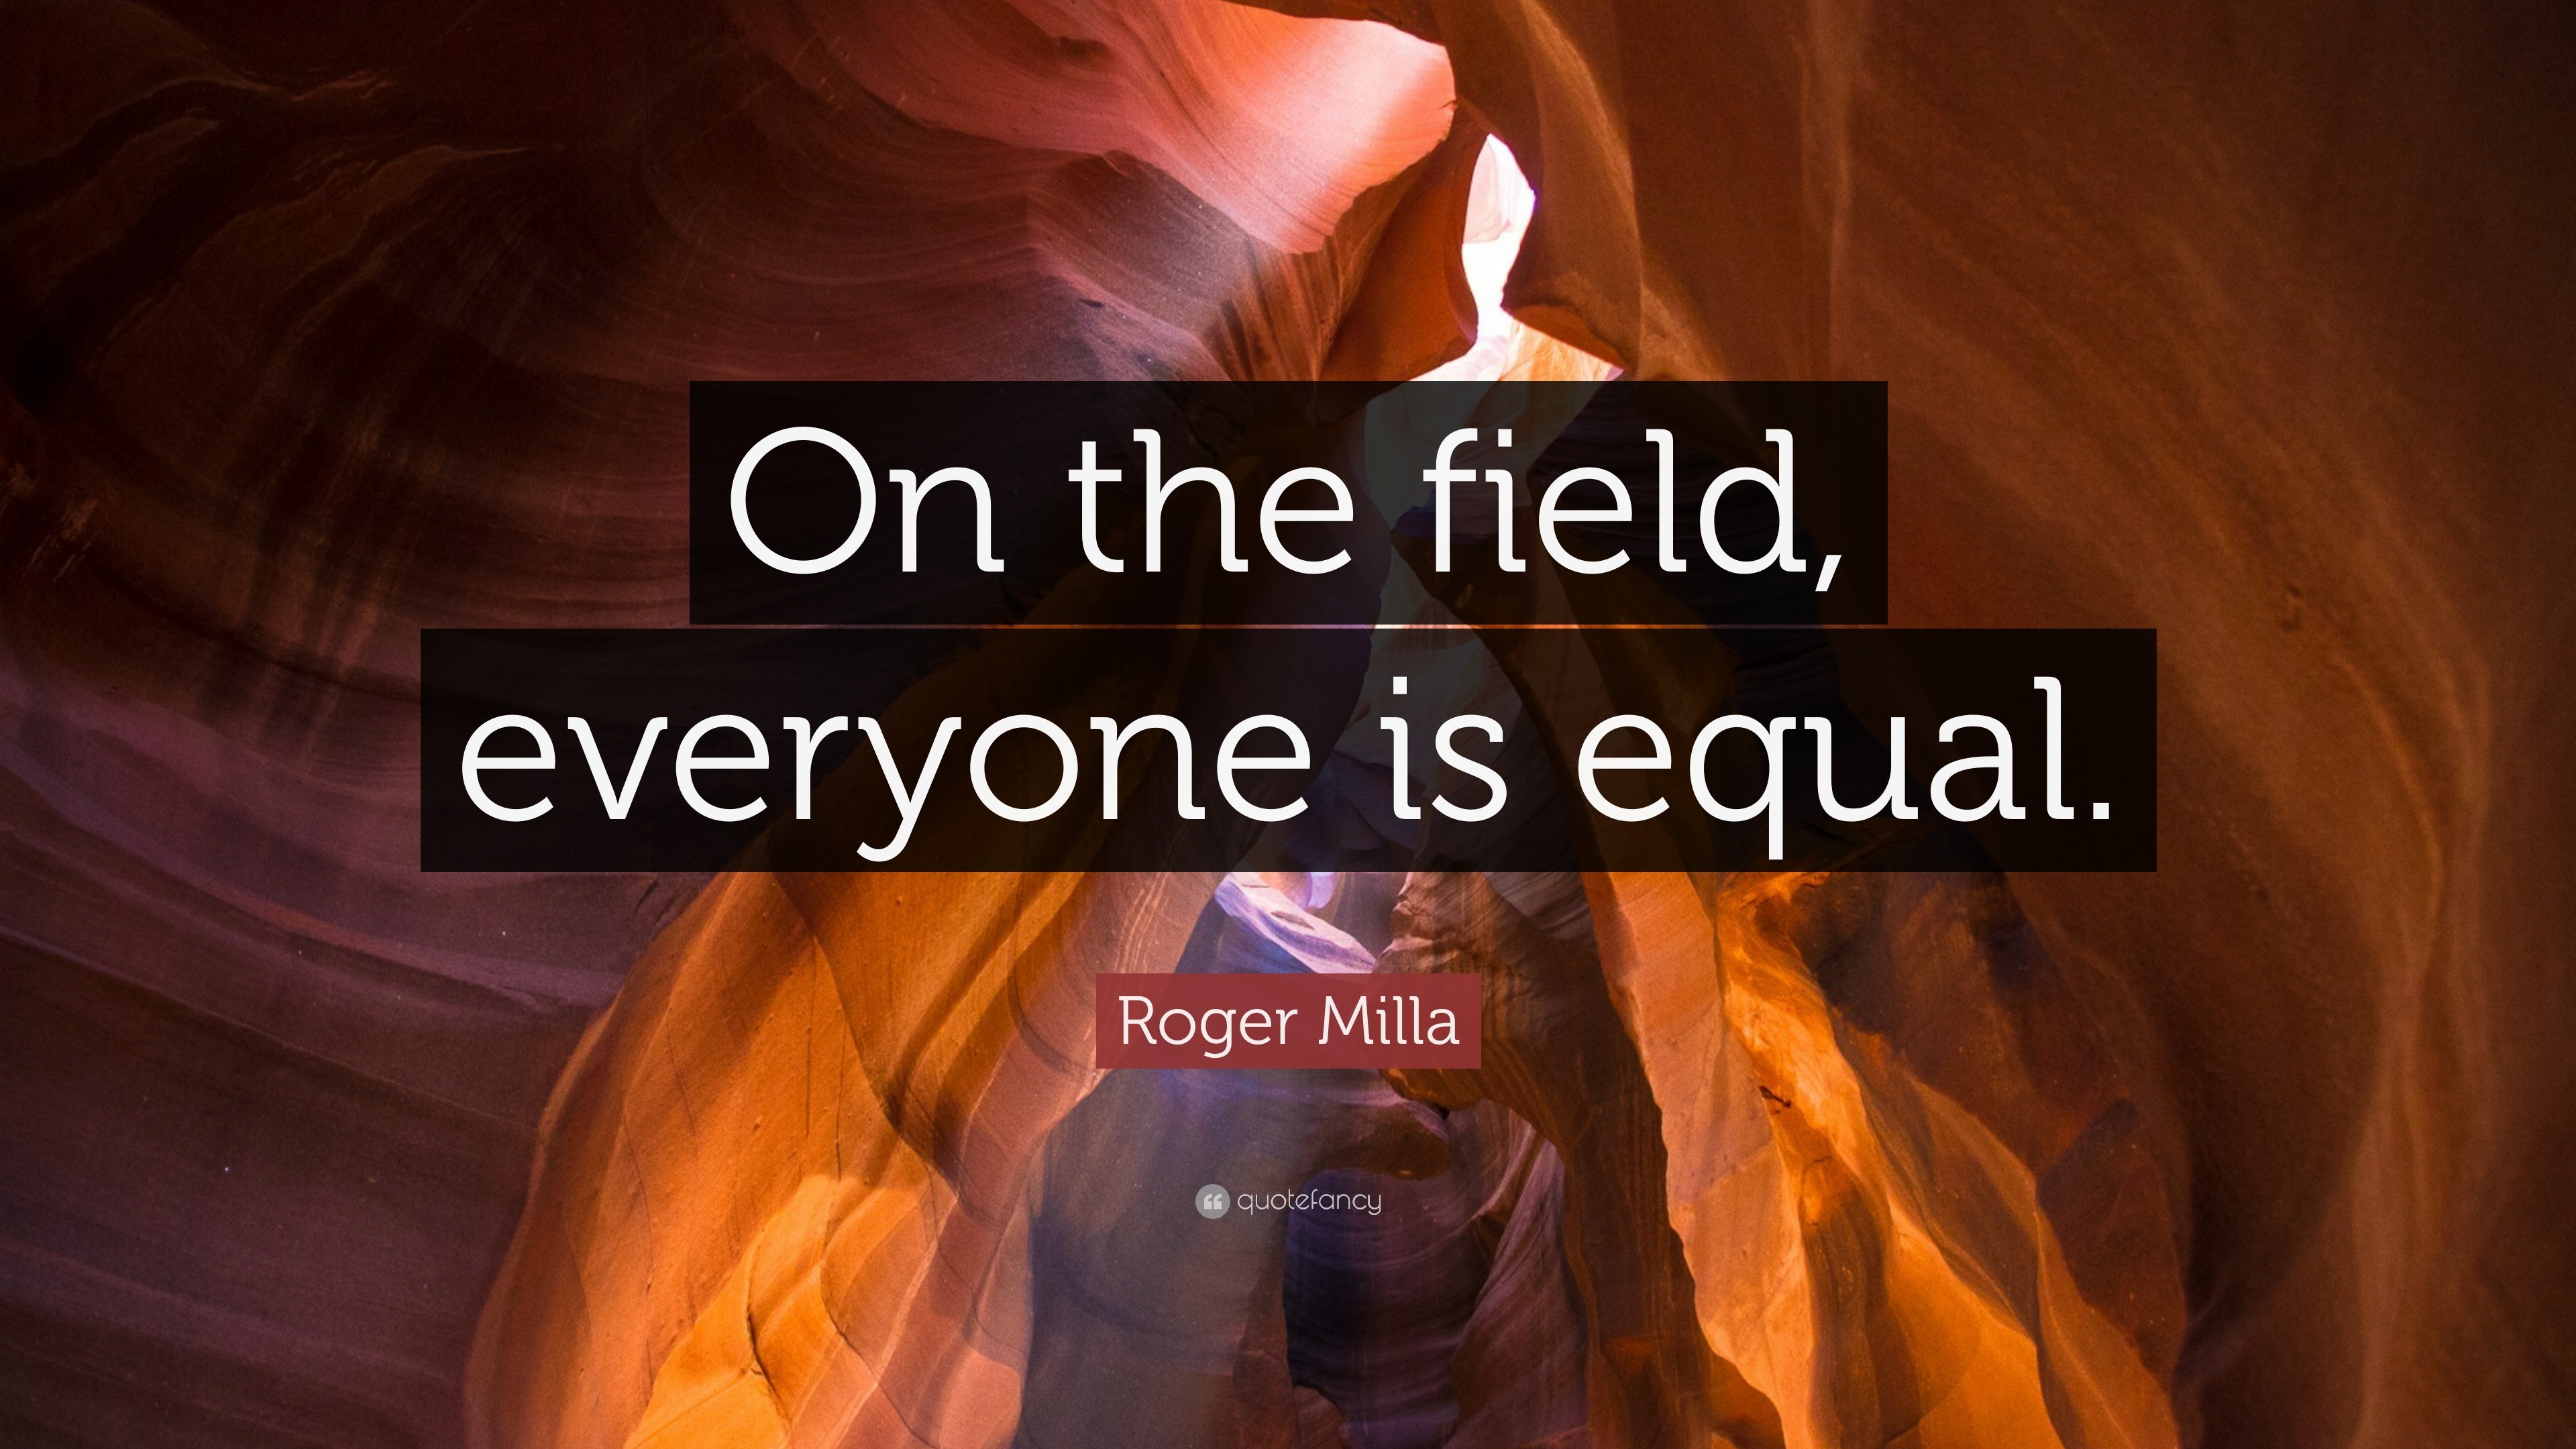 Roger Milla Quote: “On field, everyone is equal.”